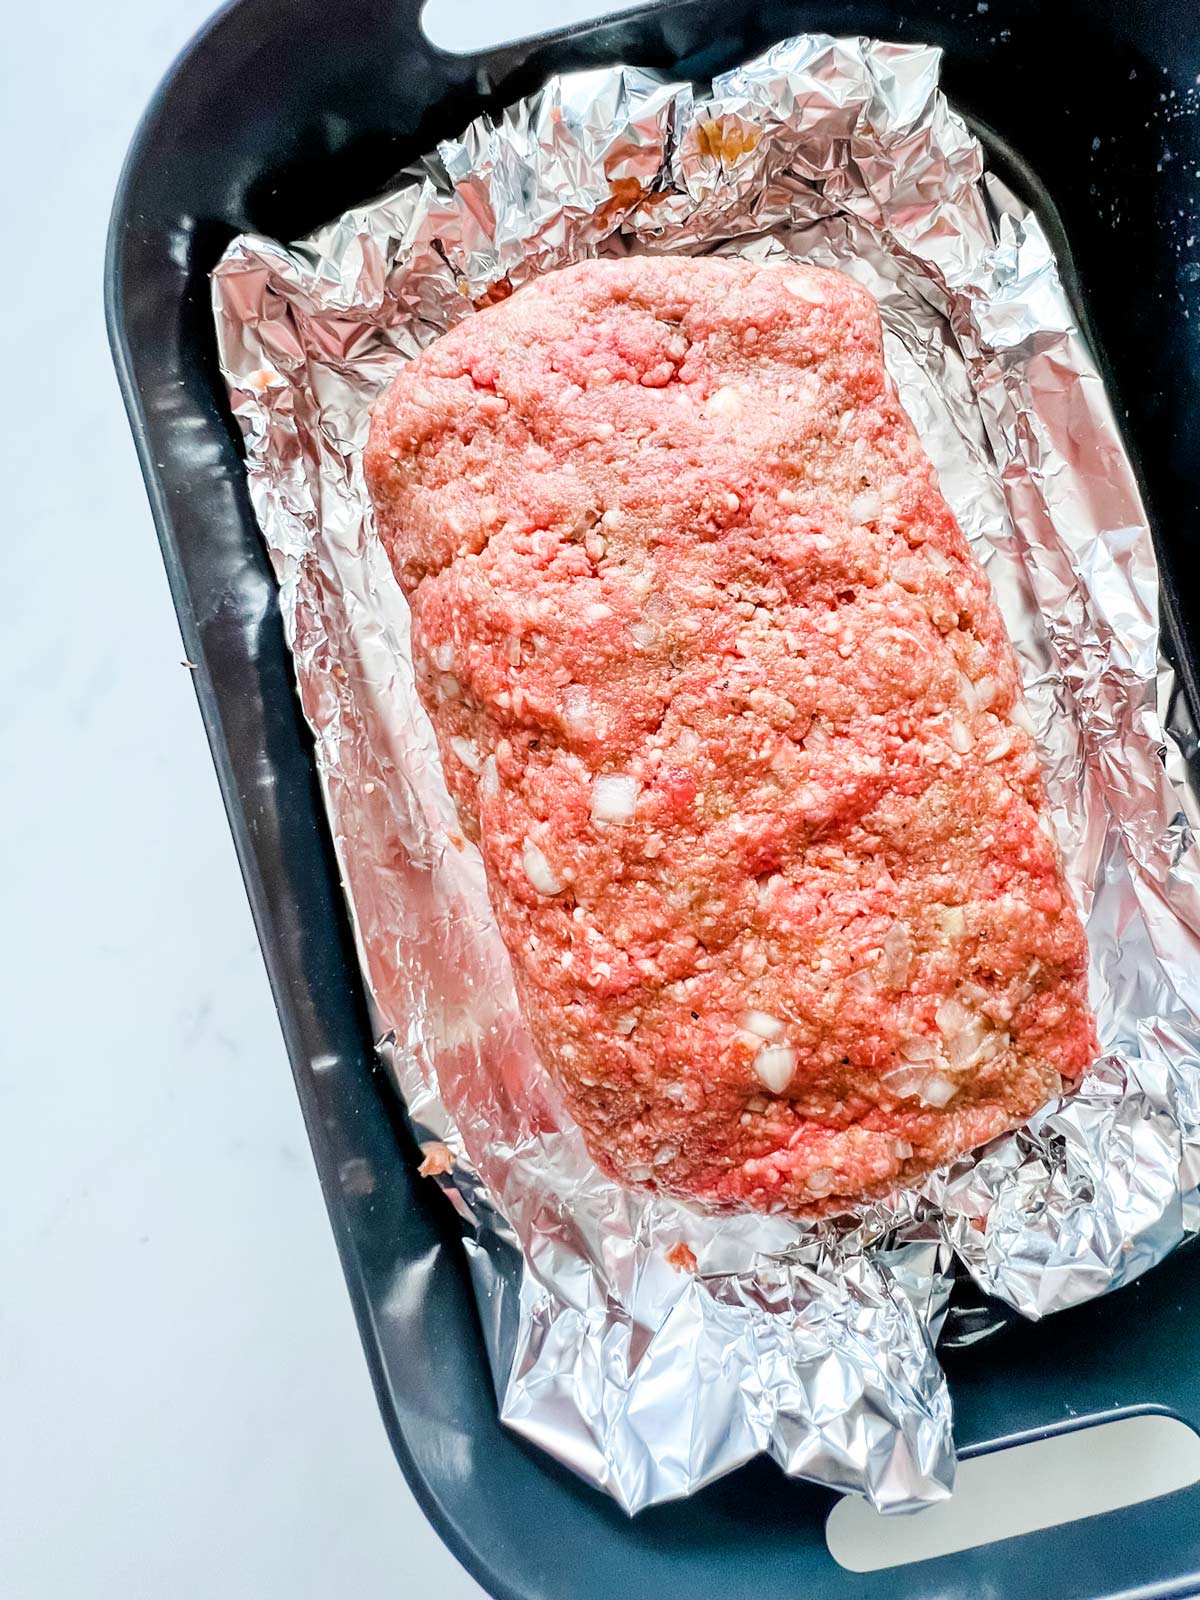 Meatloaf shaped on top of foil in an air crisp basket of a Foodi Grill.